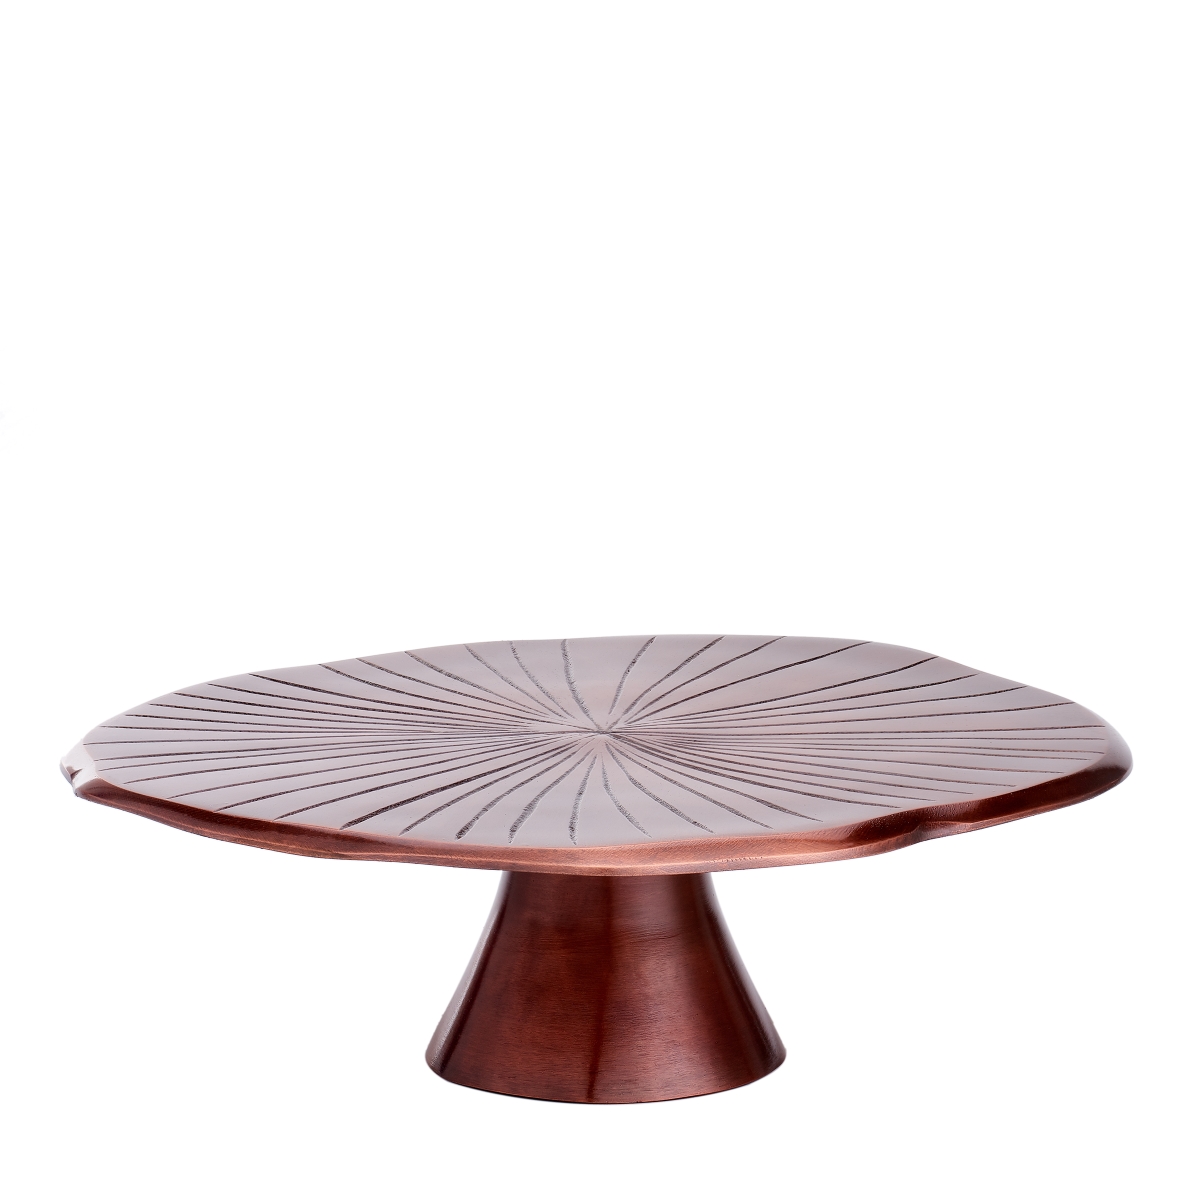 3440ac 14.5 X 3.87 In. Lily Pad Cake Stand, Antique Copper